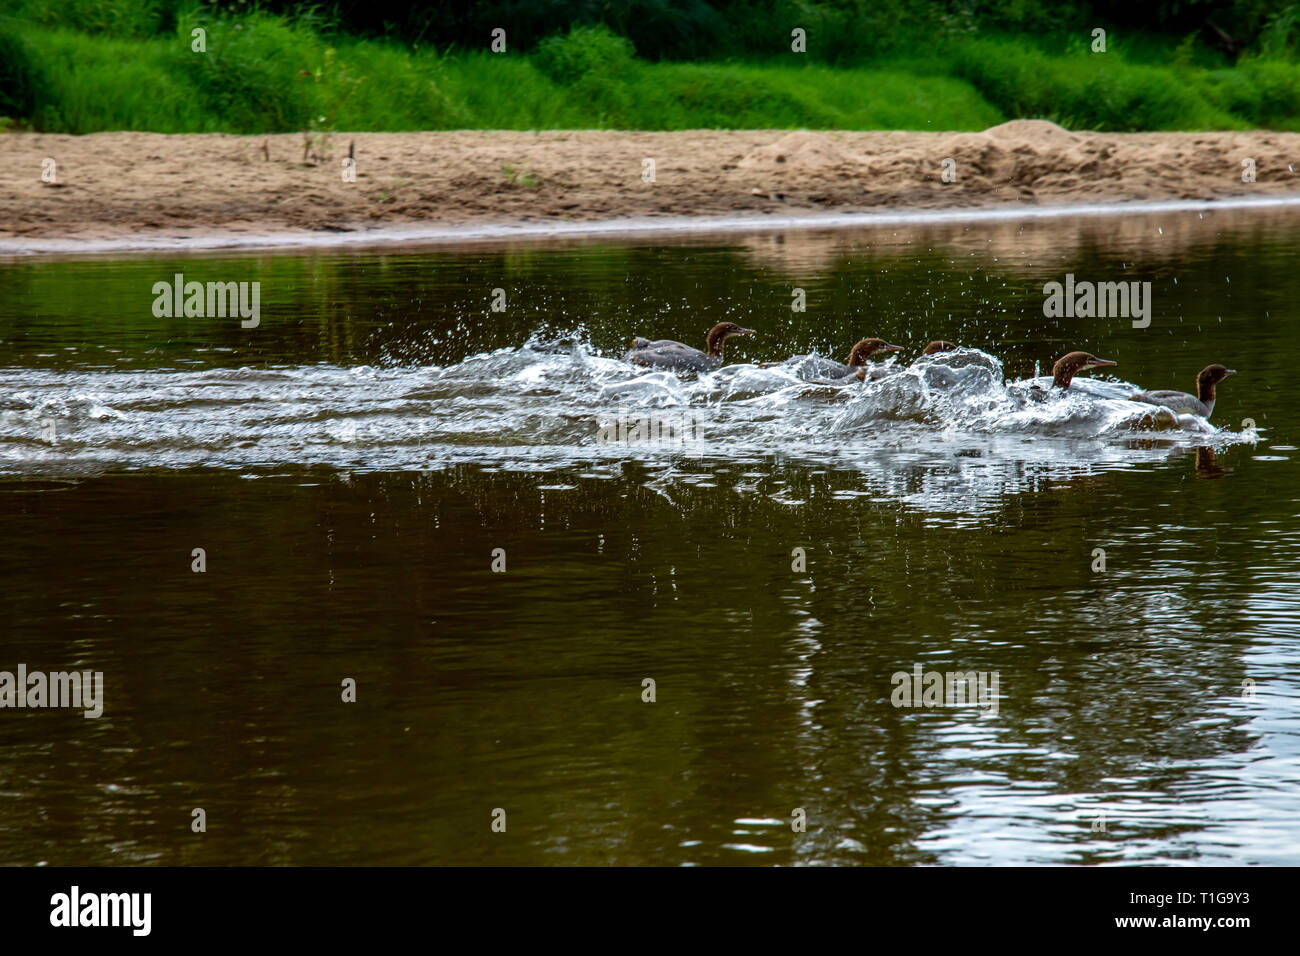 Ducks swimming in the river Gauja. Ducks on coast of river Gauja in Latvia. Duck is a waterbird with a broad blunt bill, short legs, webbed feet, and  Stock Photo